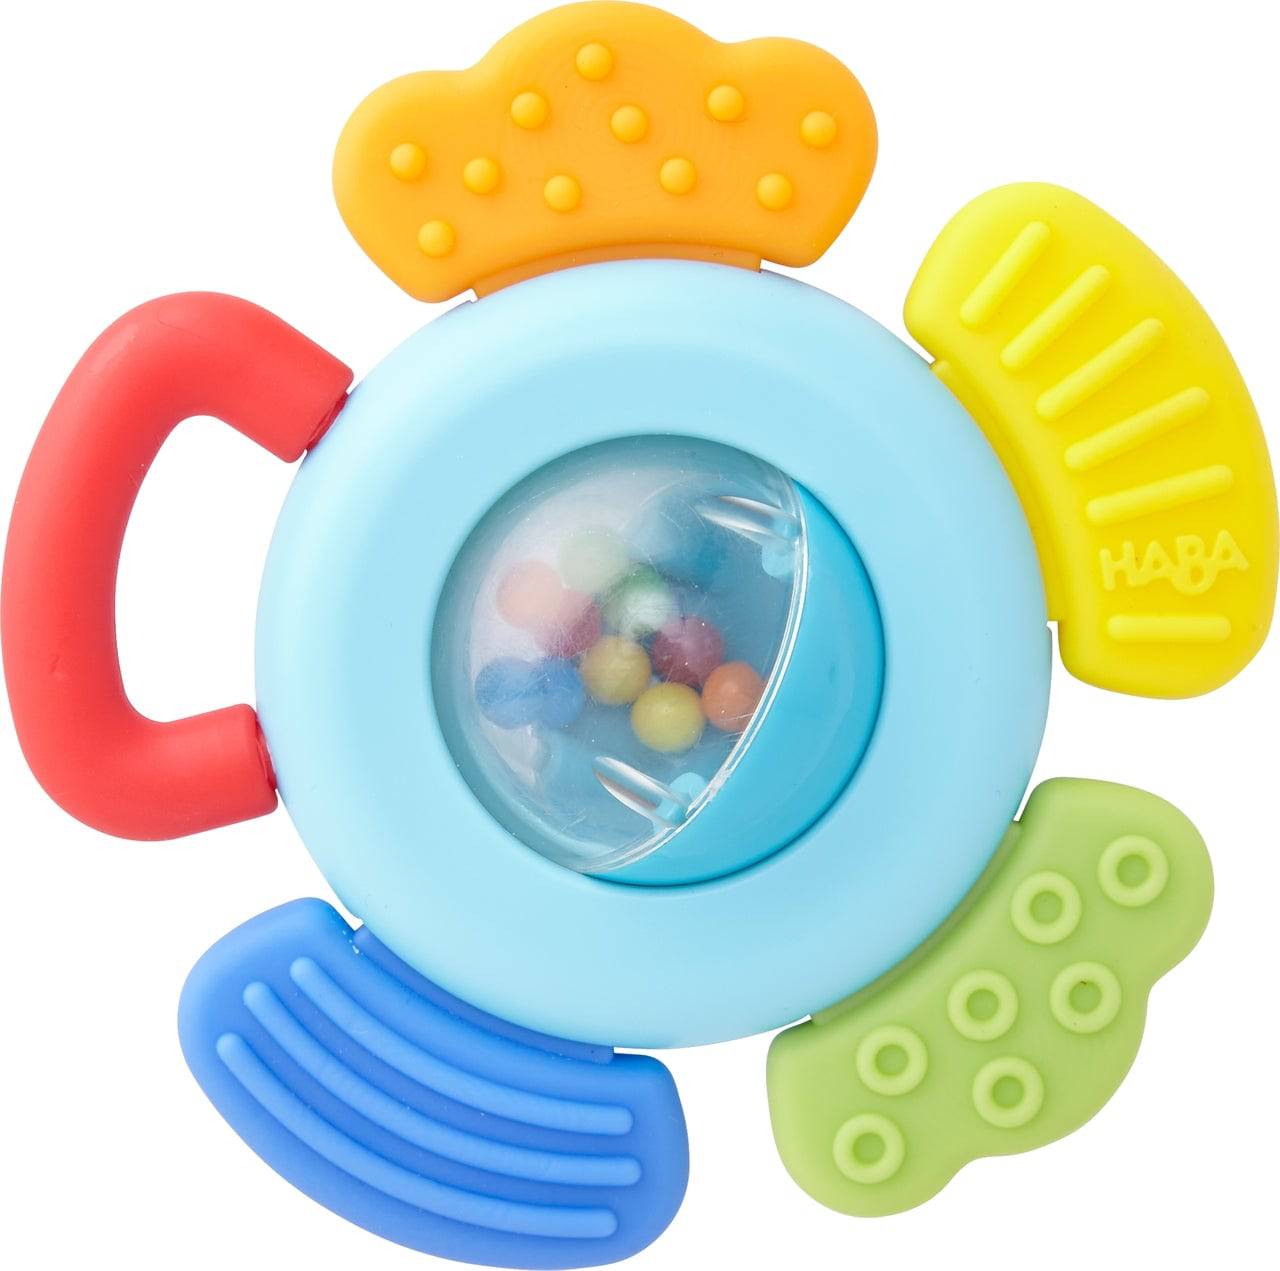 Blossom Plastic Baby Rattle & Teething Toy - HABA USA